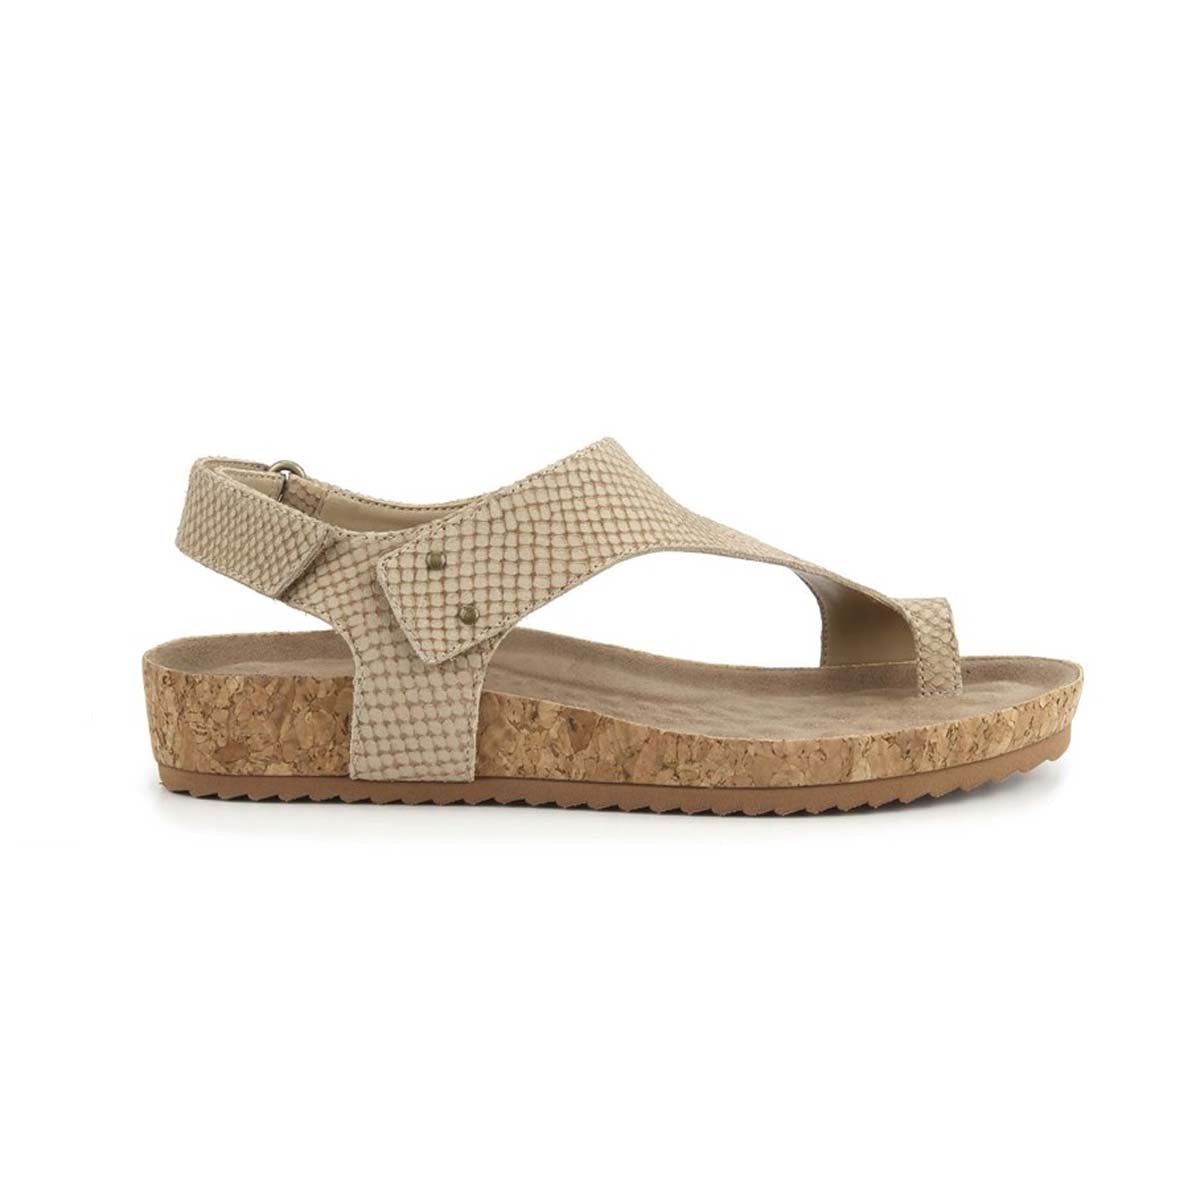 ROS HOMMERSON PRESTON WOMEN'S ADJUSTABLE STRAPS SANDAL IN TAUPE - TLW Shoes